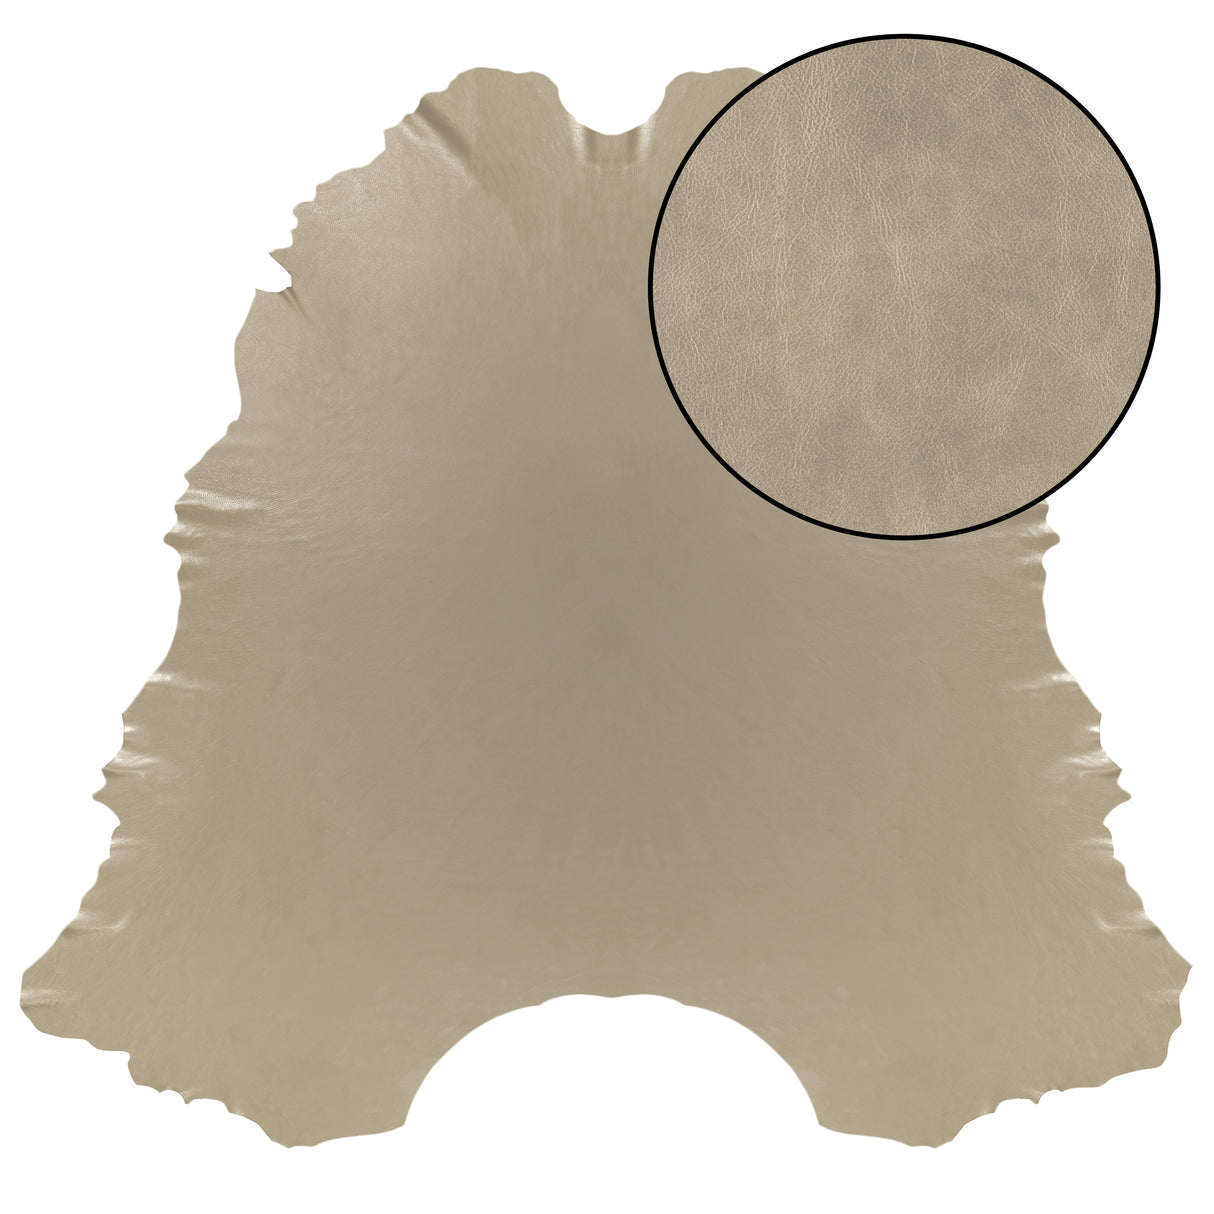 Stone Beige - Highline Transitional Two Tone Collection - Whole Hide Upholstery Leather ($7.00/SqFt)